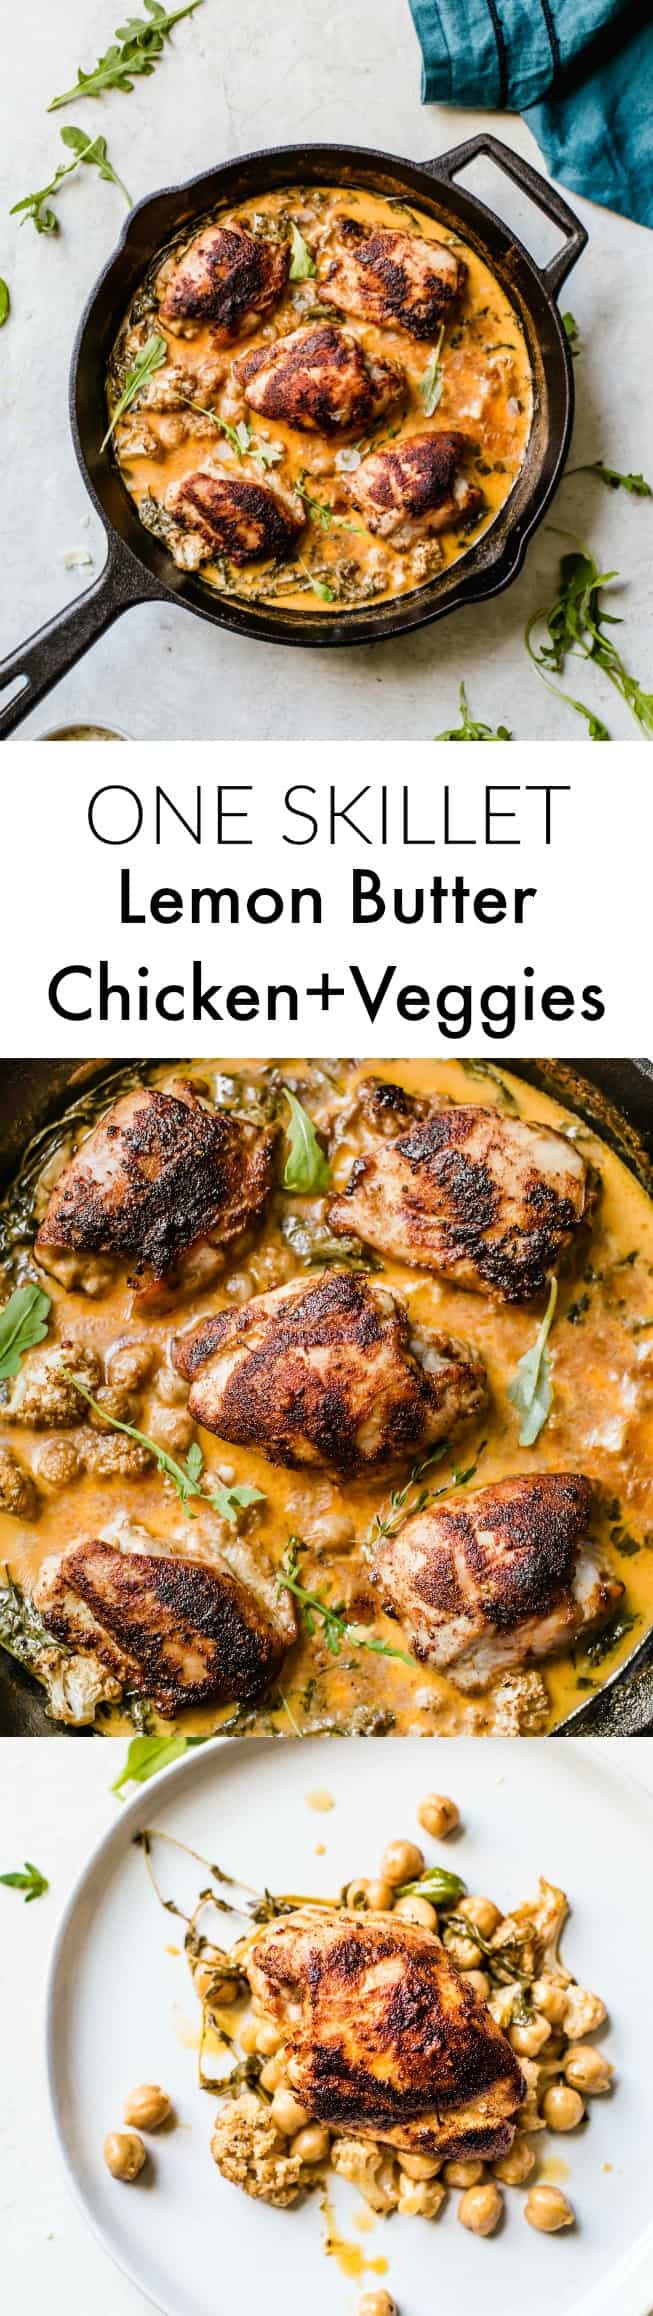 This One Skillet Lemon Butter Chicken is my favorite weeknight meals! It's low carb + gluten free, you'll be slurping the sauce with a spoon, it's so good! thetoastedpinenut.com #thetoastedpinenut #oneskillet #onepan #weeknightmeal #weeknightdinner #chicken #cauliflower #chickpeas #glutenfree #lowcarb #chickenthighs